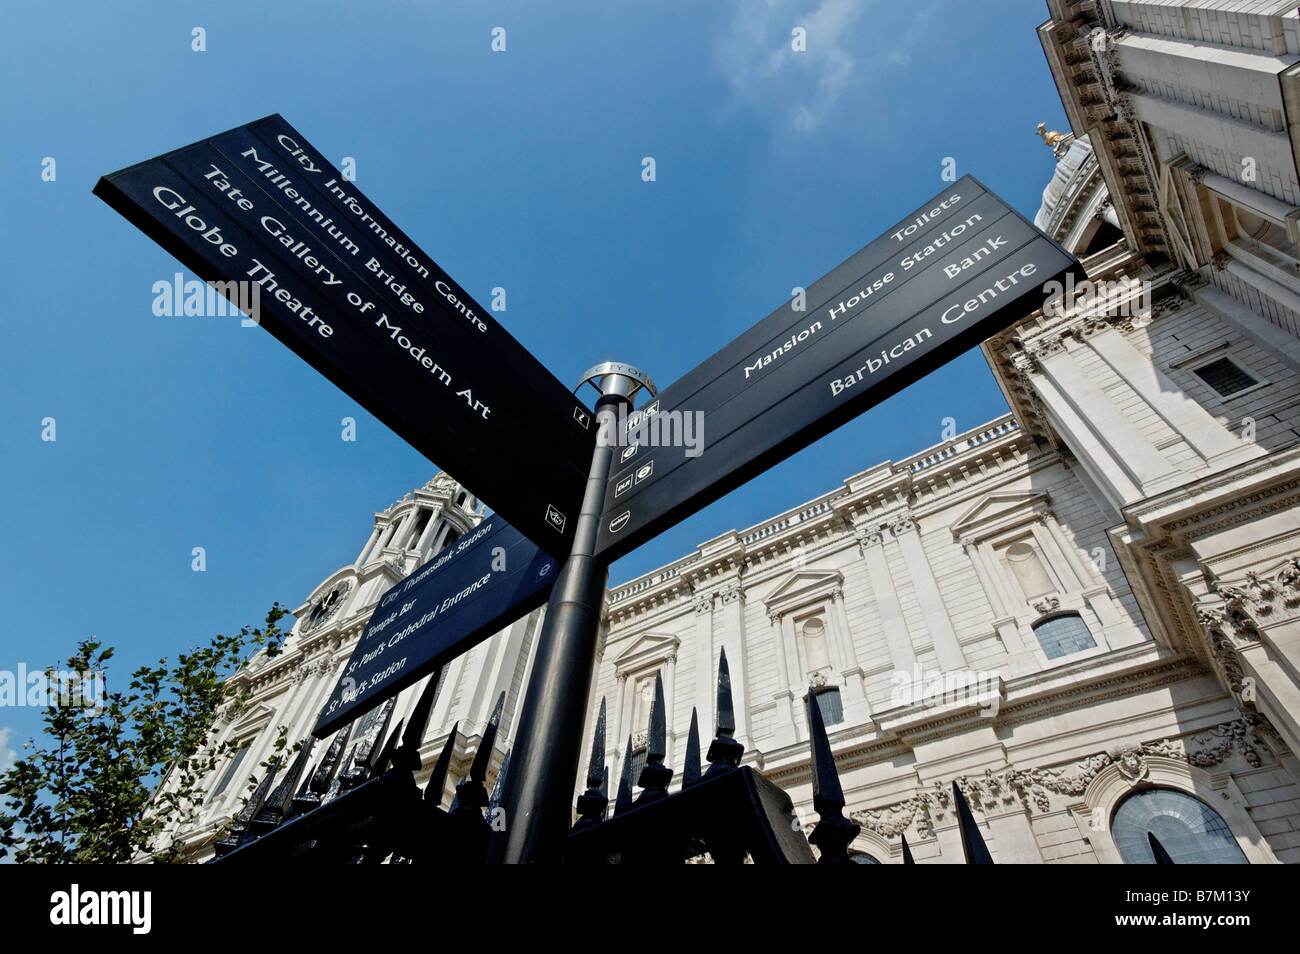 Looking up at St Pauls Cathedral and a sign for various tourist attractions Stock Photo